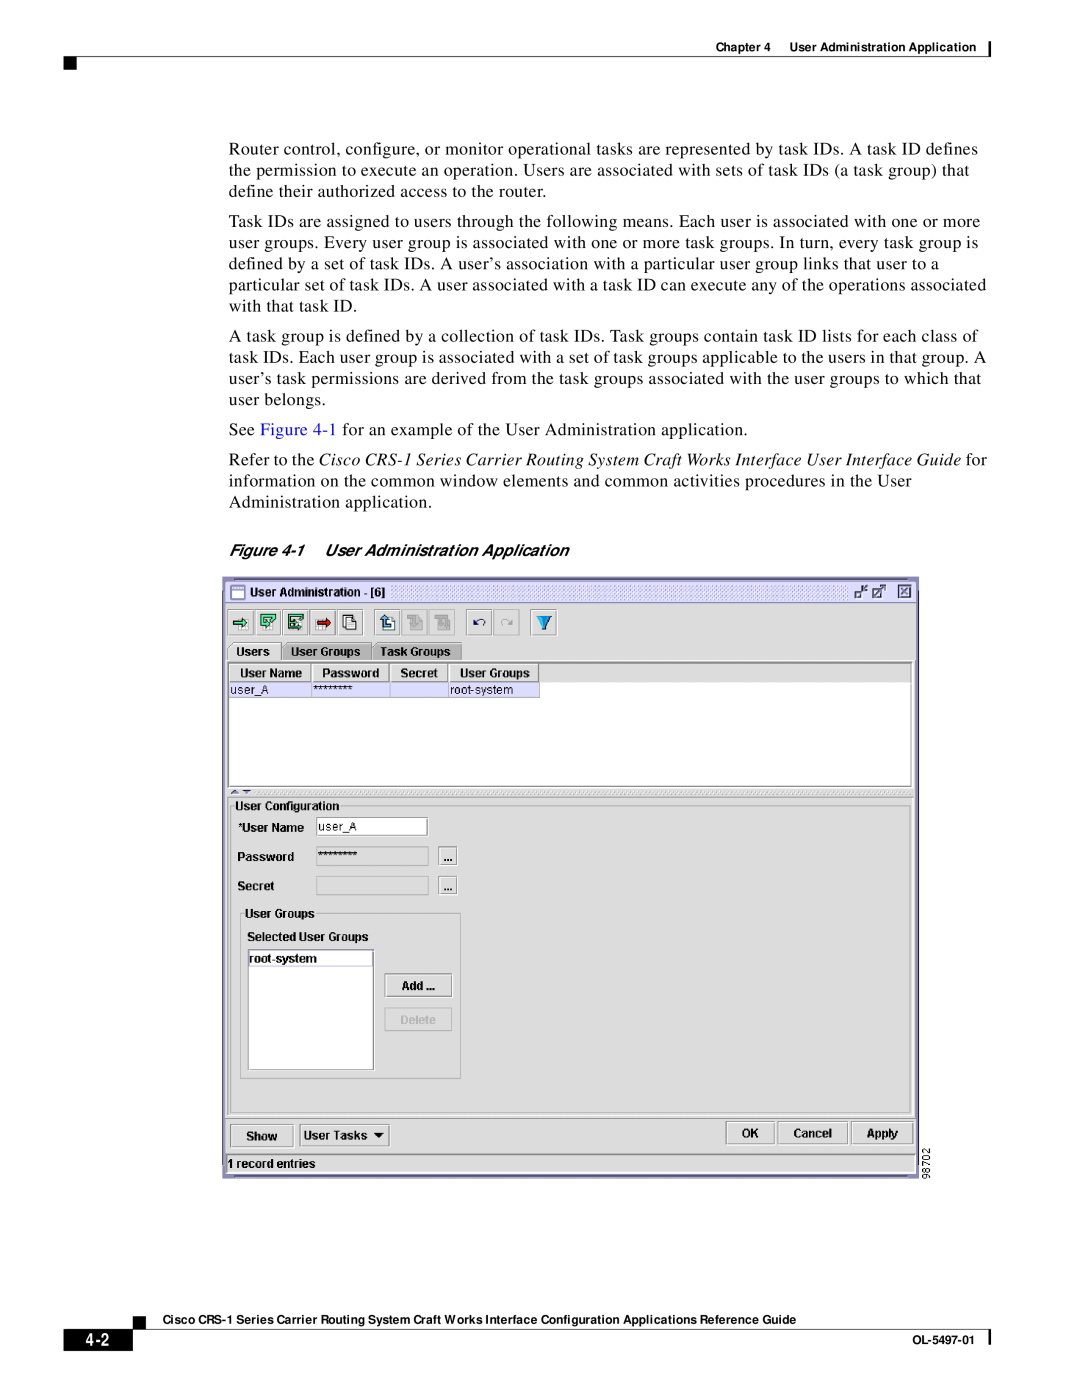 Cisco Systems CRS-1 Series manual See -1 for an example of the User Administration application 